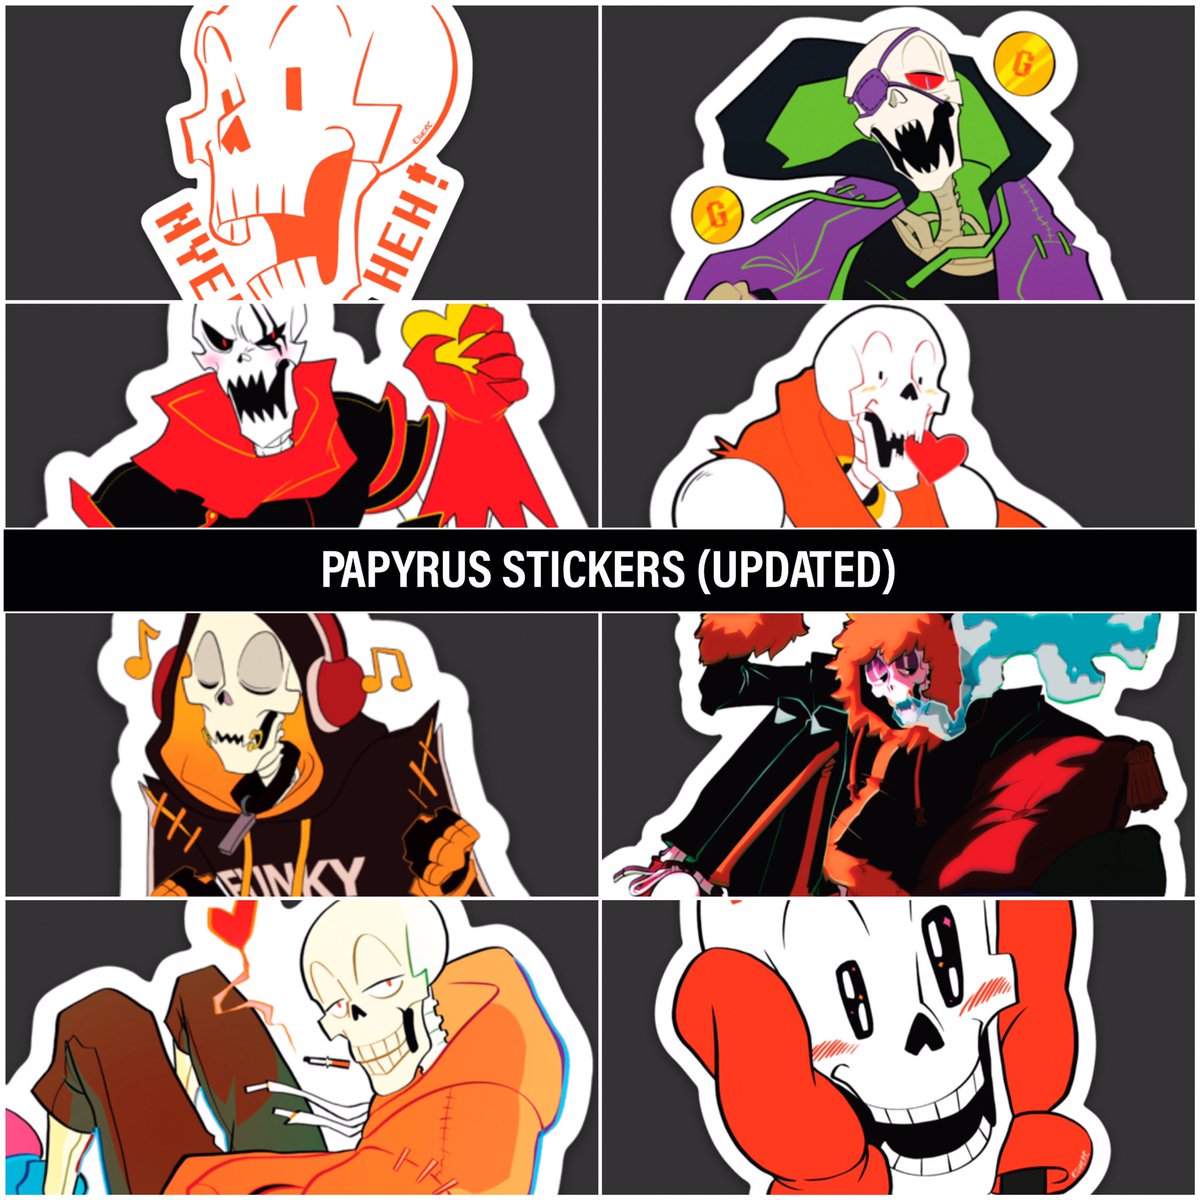 ((CORRECTED SHOP LINK!!))

My new Undertale AU sticker design are now available! Holographic stickers are now in stock! International orders OK!
#undertaleAU

SHOP: https://t.co/An36tYMzUC 